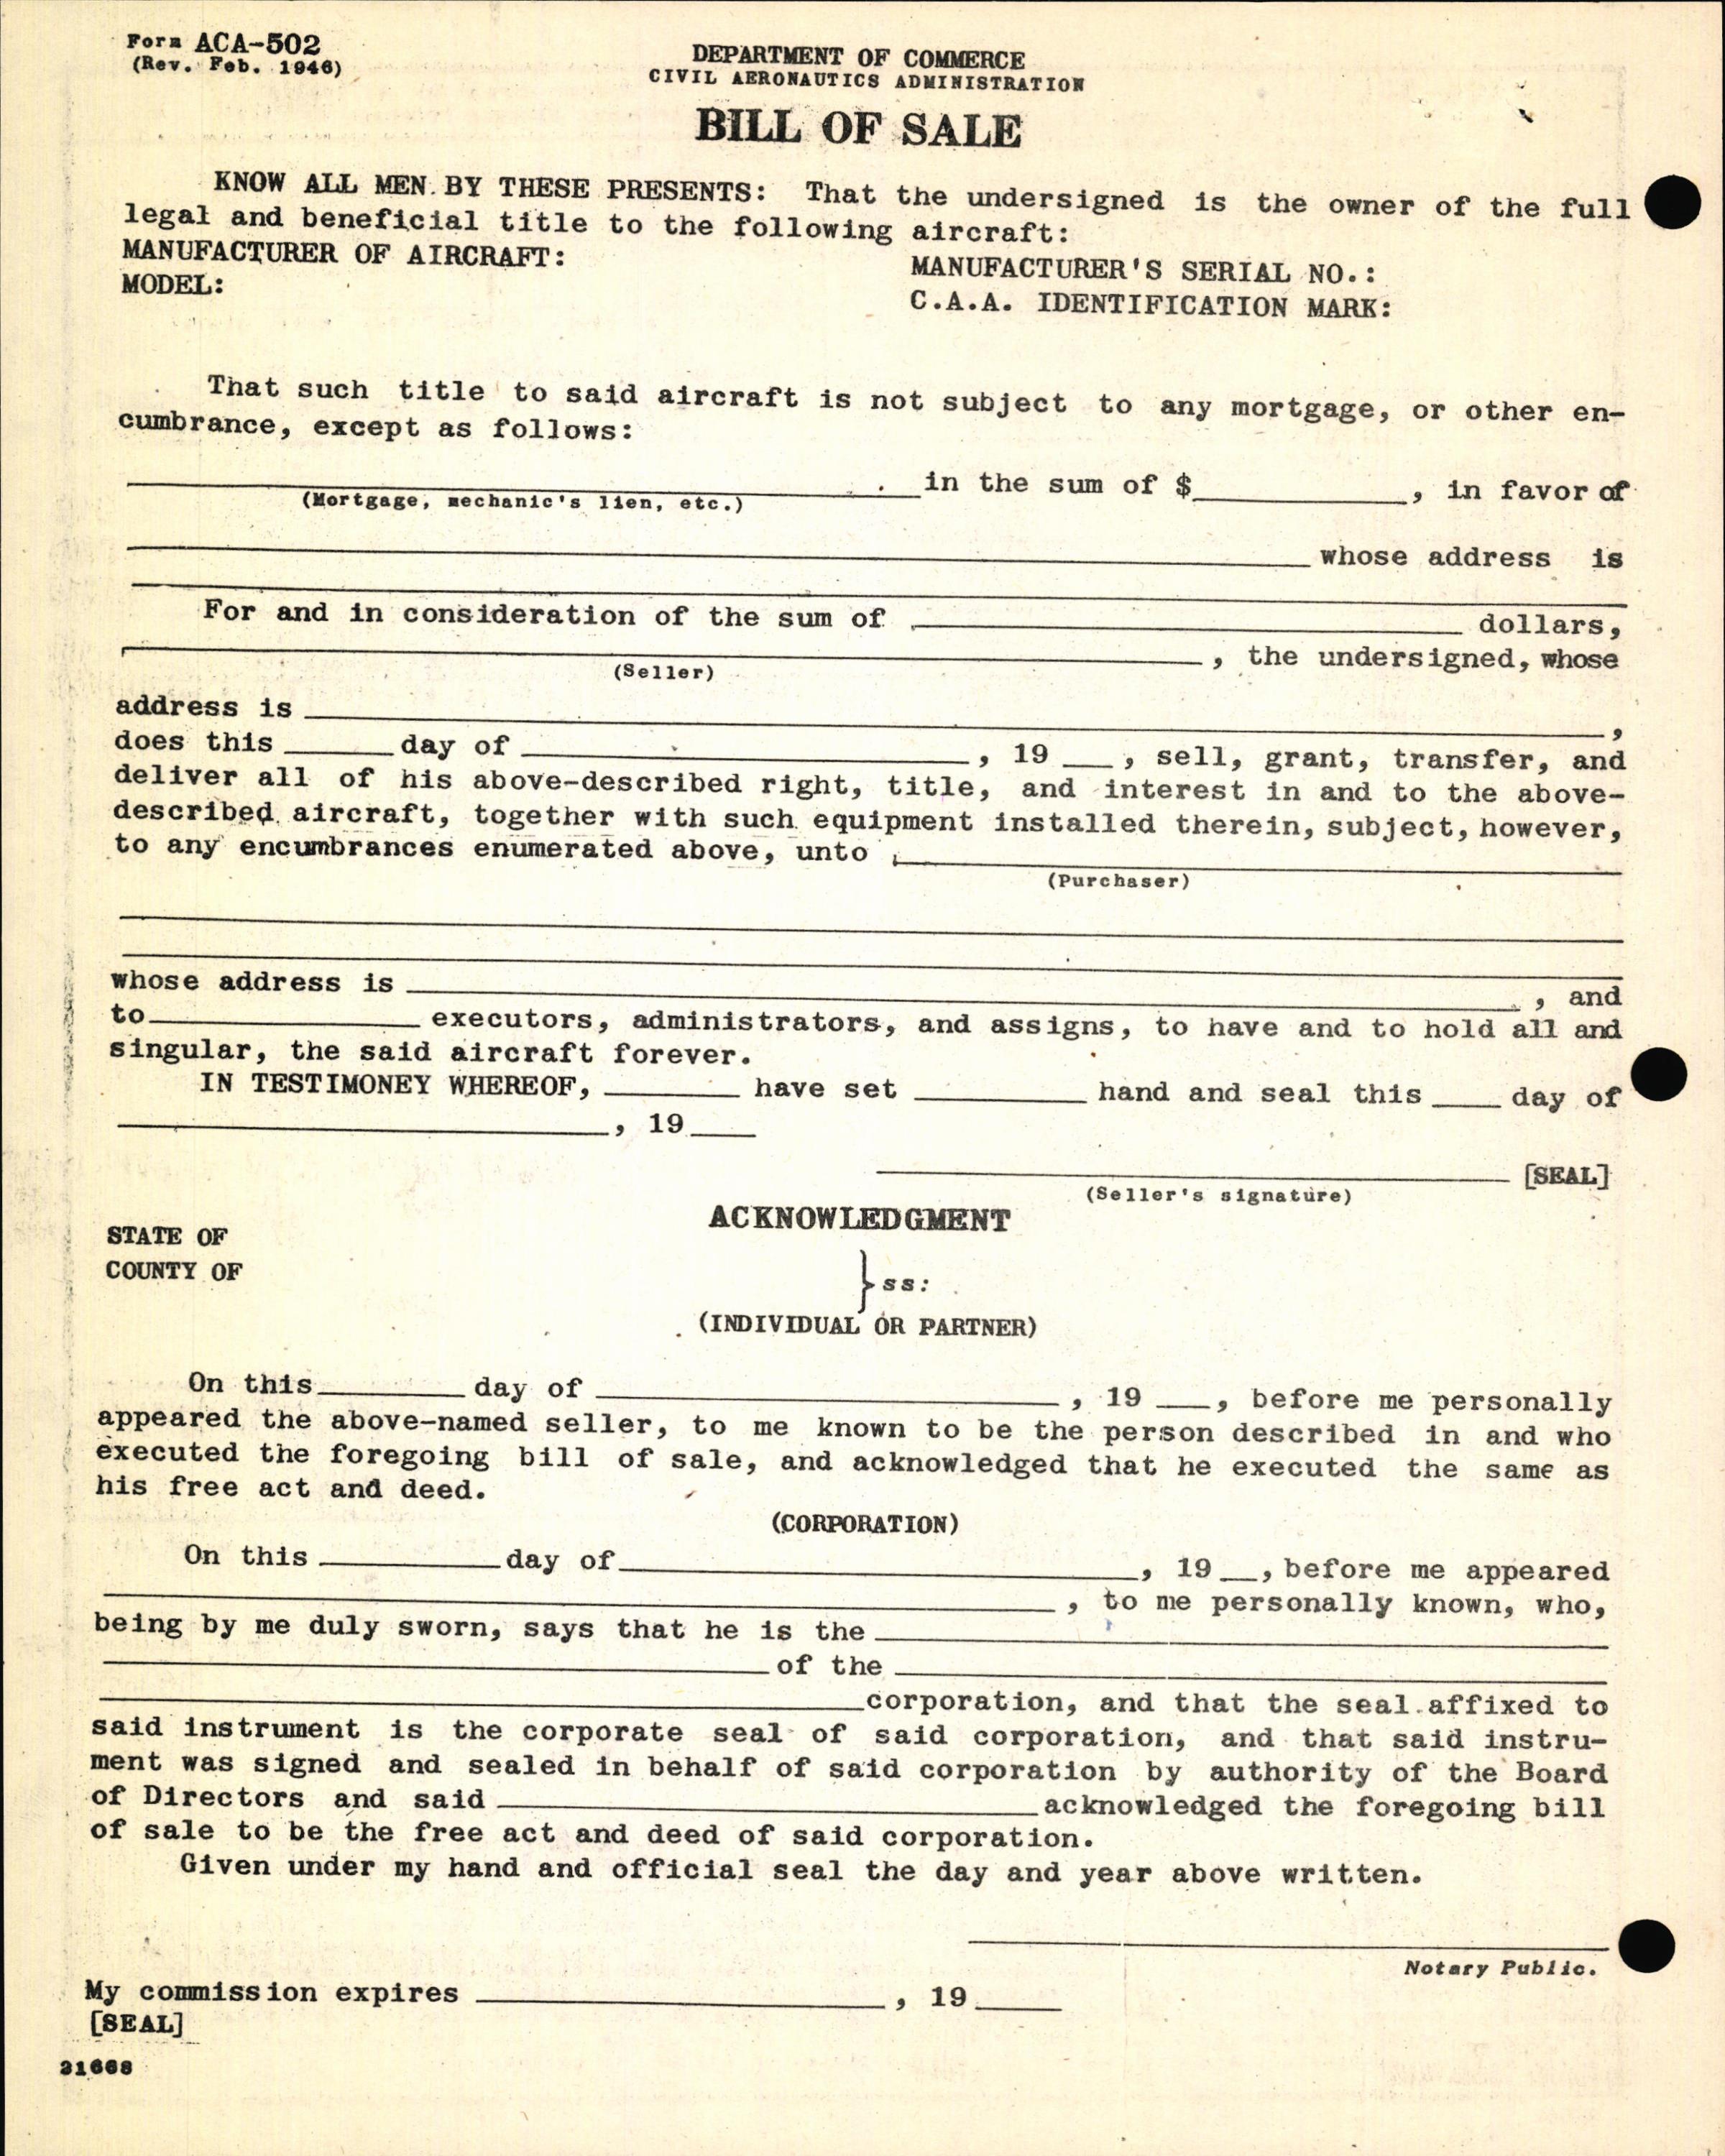 Sample page 8 from AirCorps Library document: Technical Information for Serial Number 1291